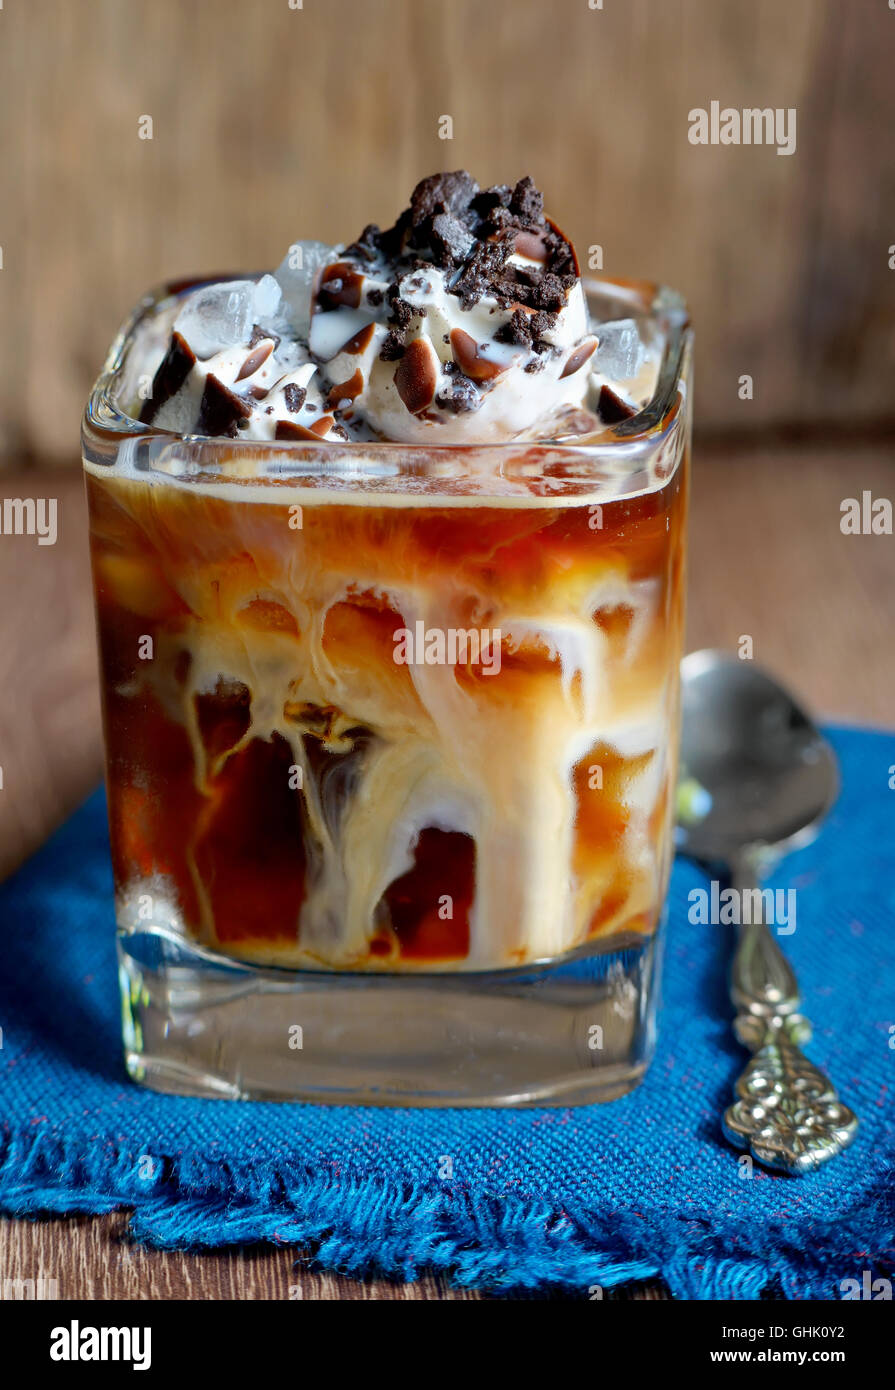 https://c8.alamy.com/comp/GHK0Y2/iced-coffee-with-ice-cream-on-wooden-table-GHK0Y2.jpg